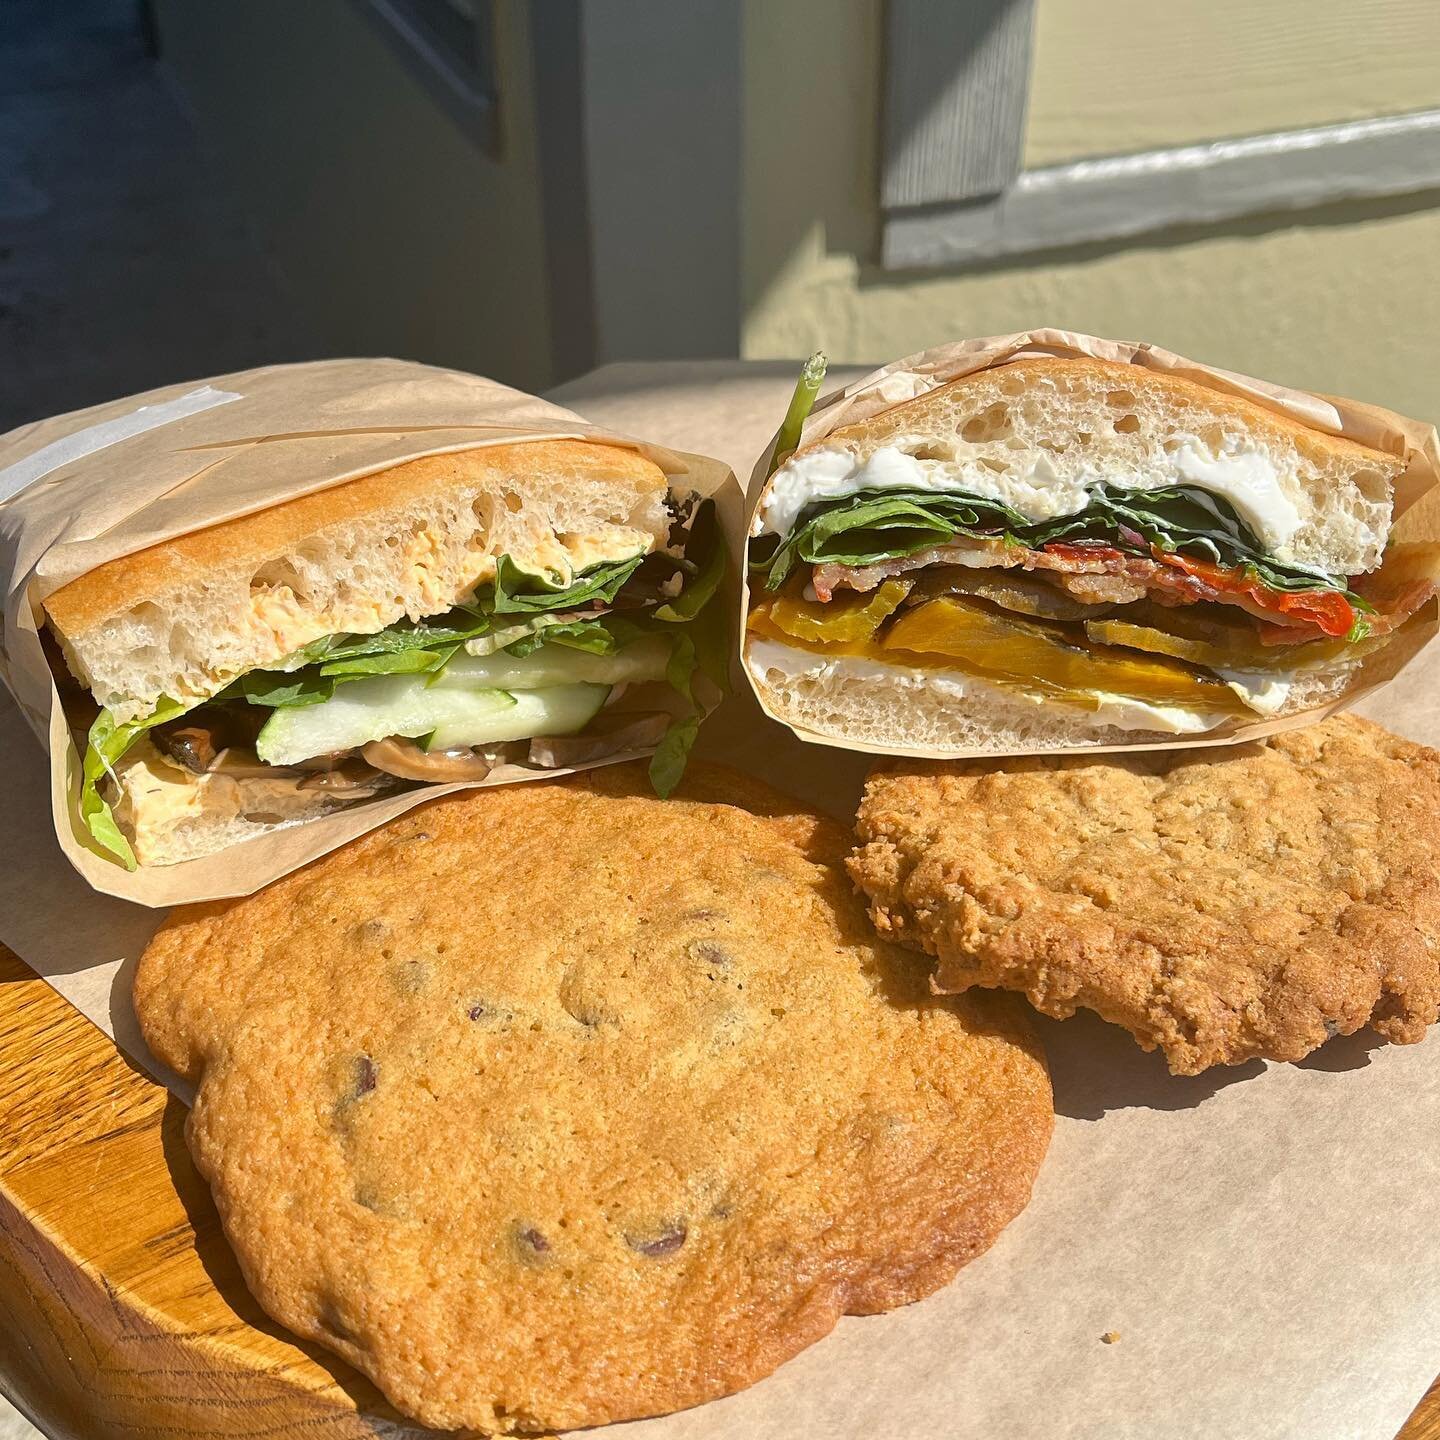 Dreaming of picnics on the lake these hot, sunny days! Come grab a sandwich, cookie, and iced drink on your way! ☀️💦 #buenaluz #bakery #portangeles